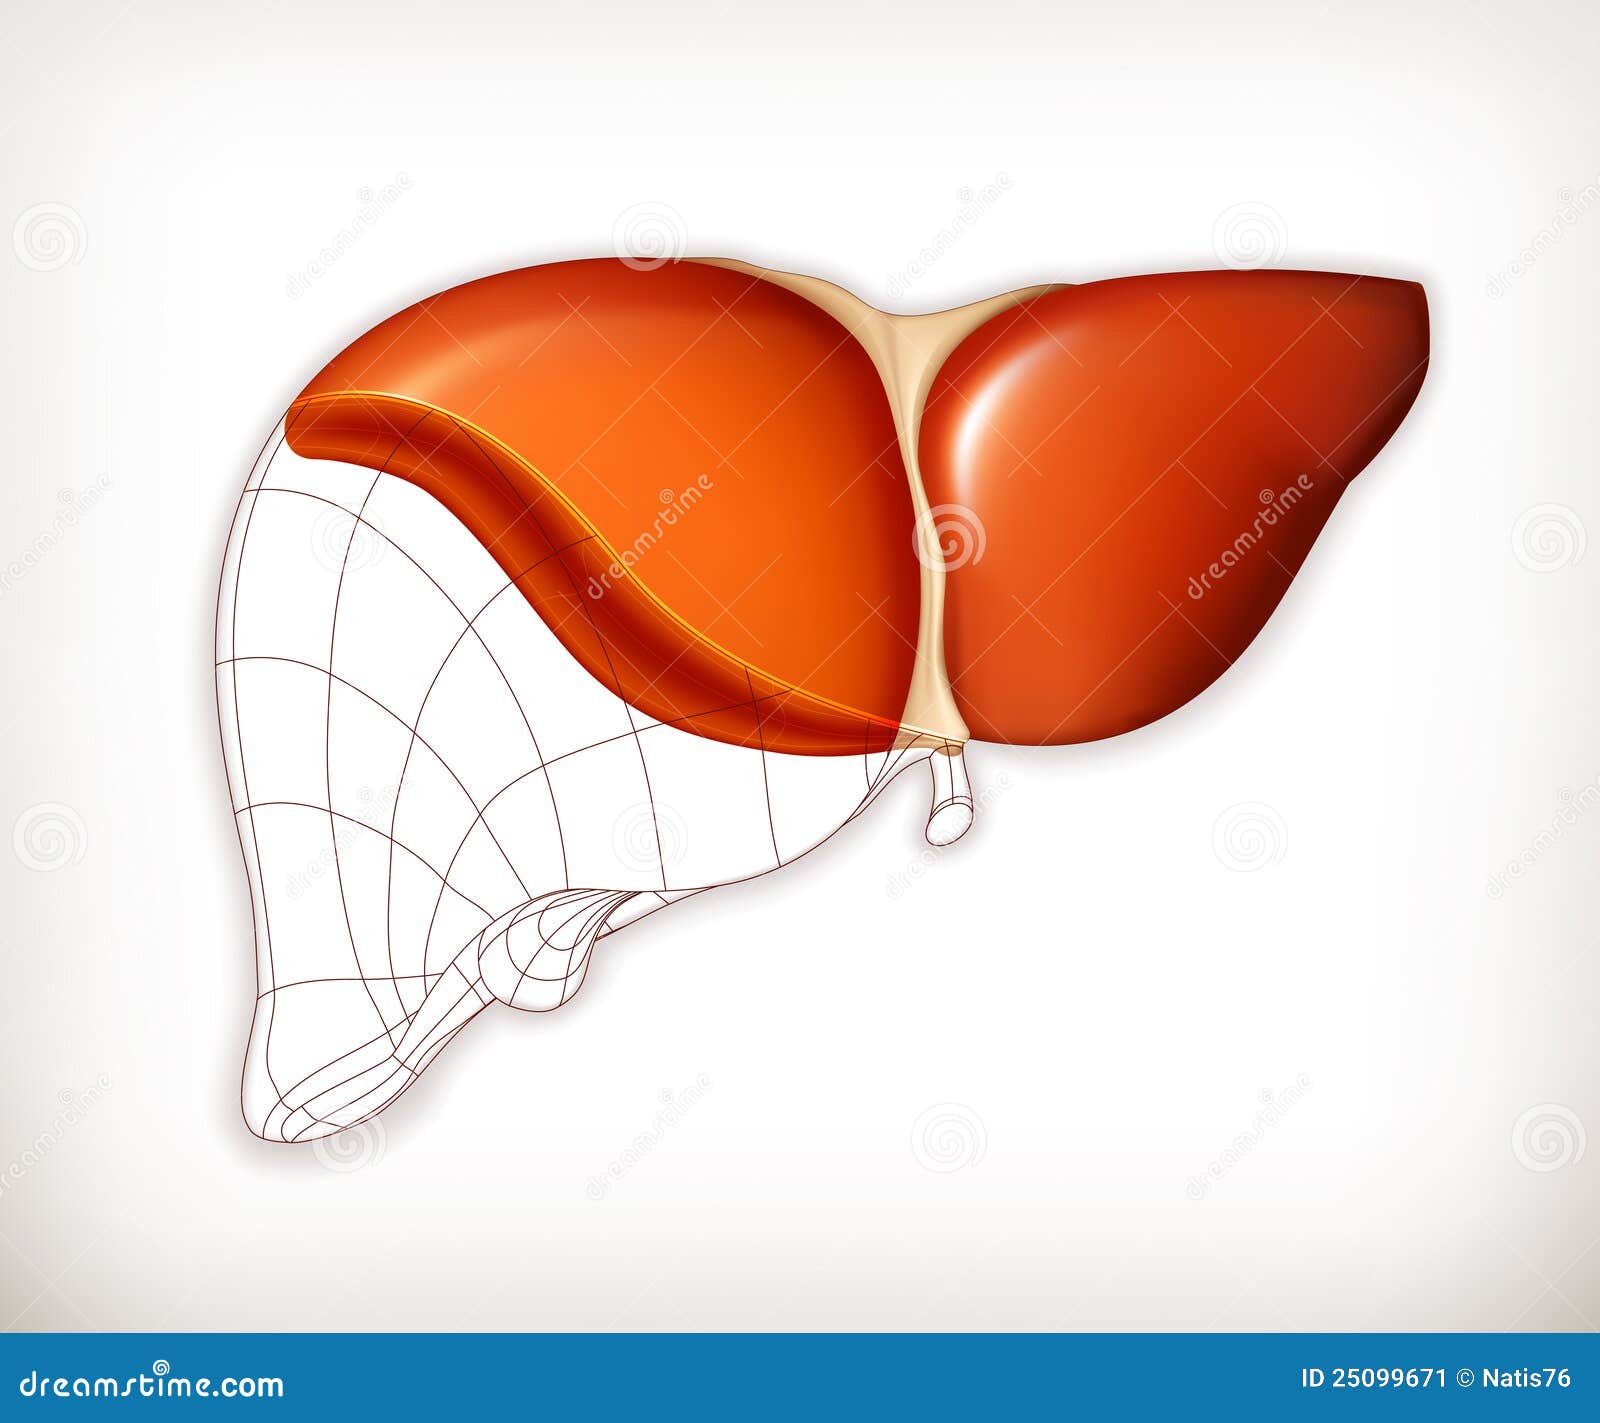 Liver Structure Stock Image - Image: 25099671